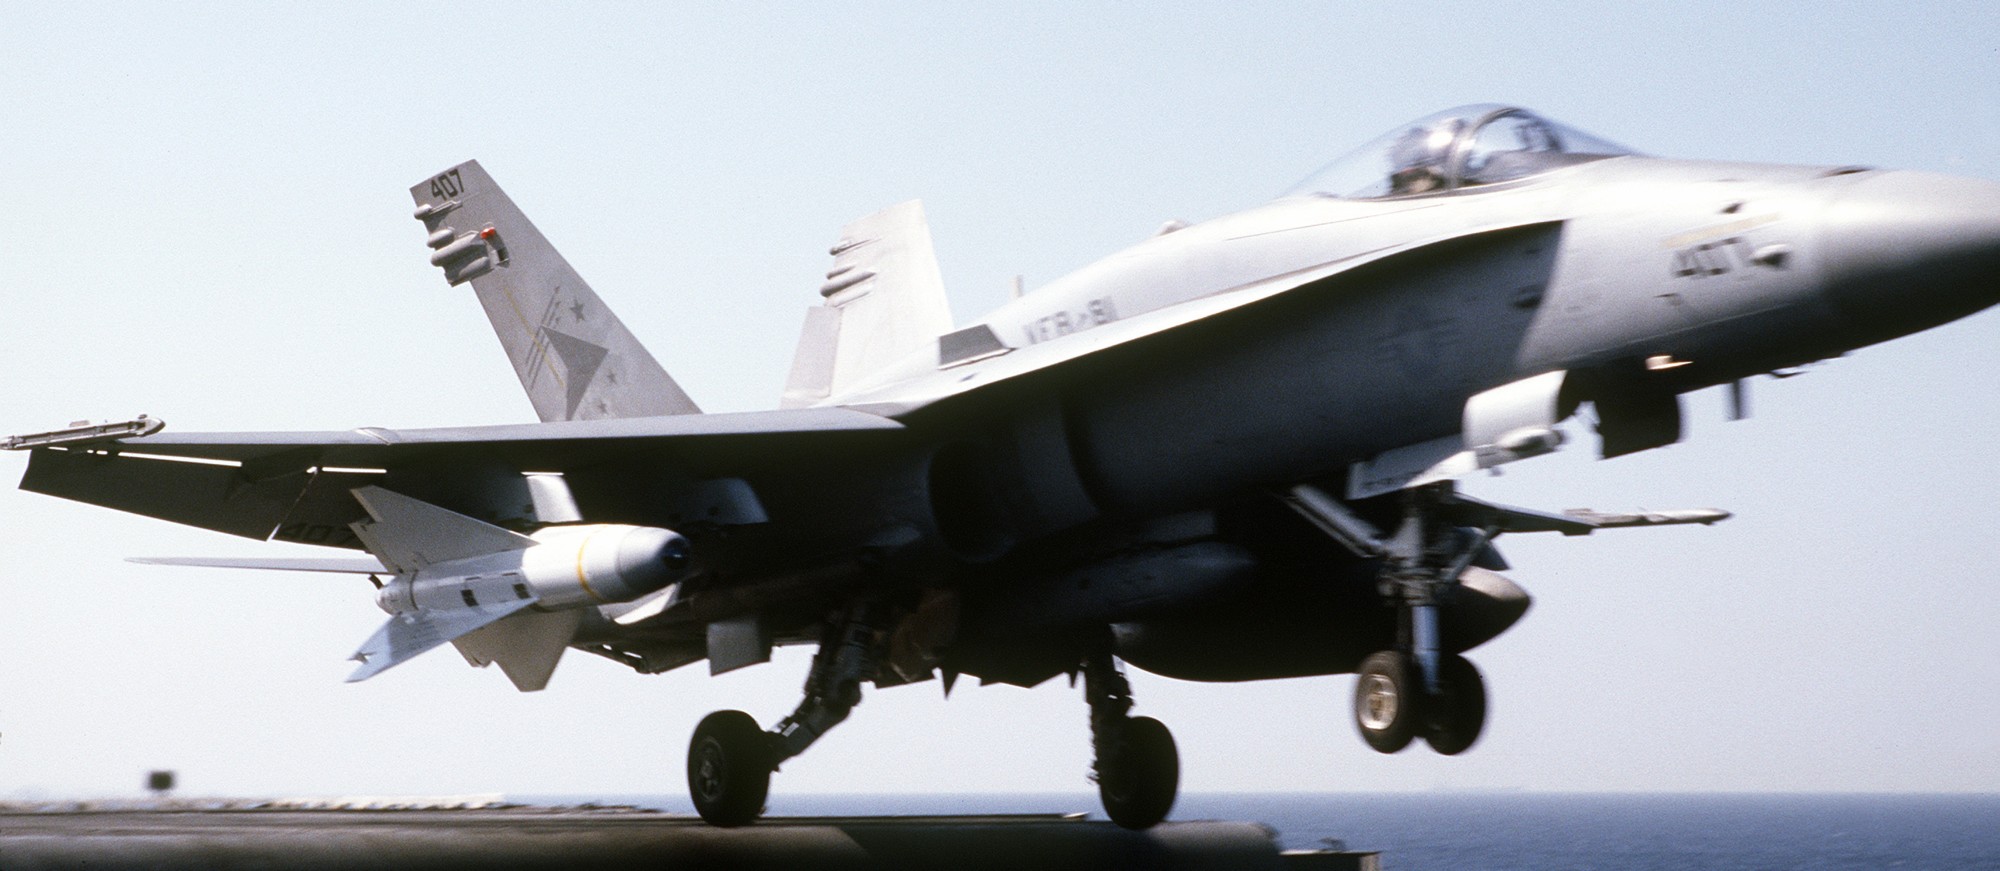 vfa-81 sunliners strike fighter squadron f/a-18c hornet cvw-17 cv-60 uss saratoga agm-62 walleye missile 107p